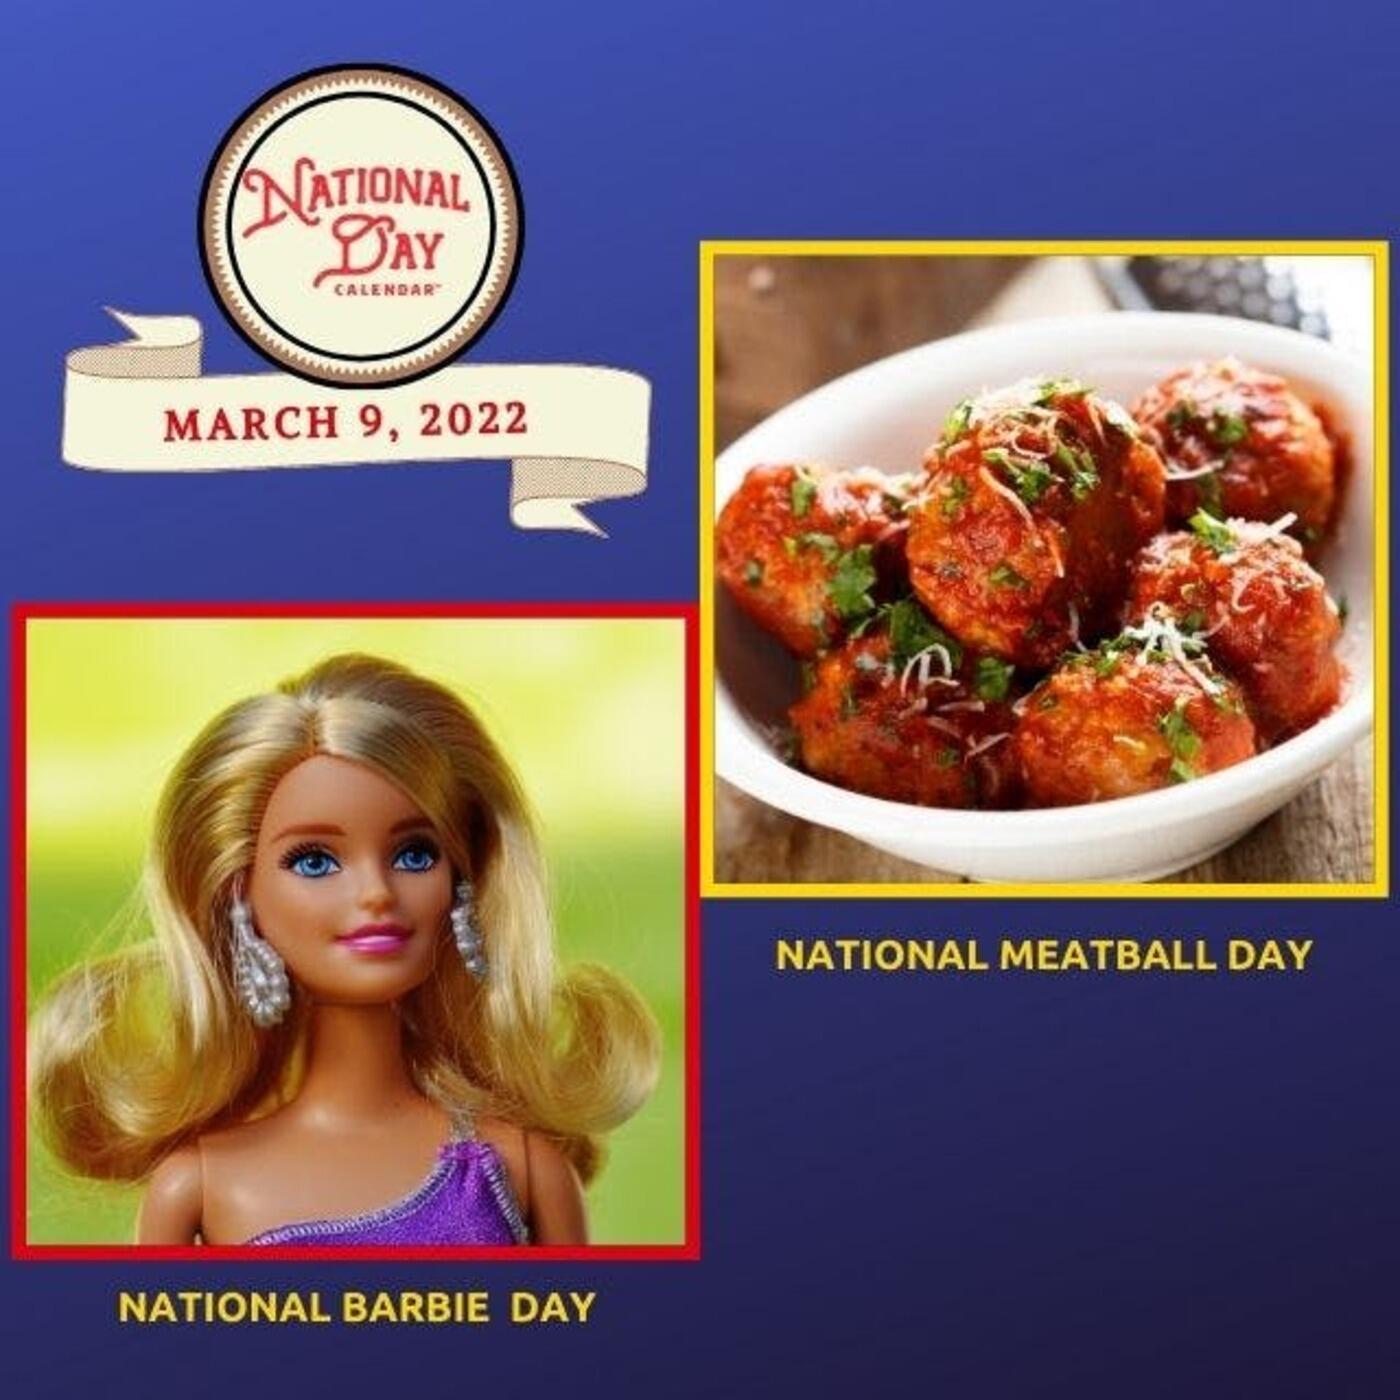 NATIONAL GET OVER IT DAY - March 9 - National Day Calendar